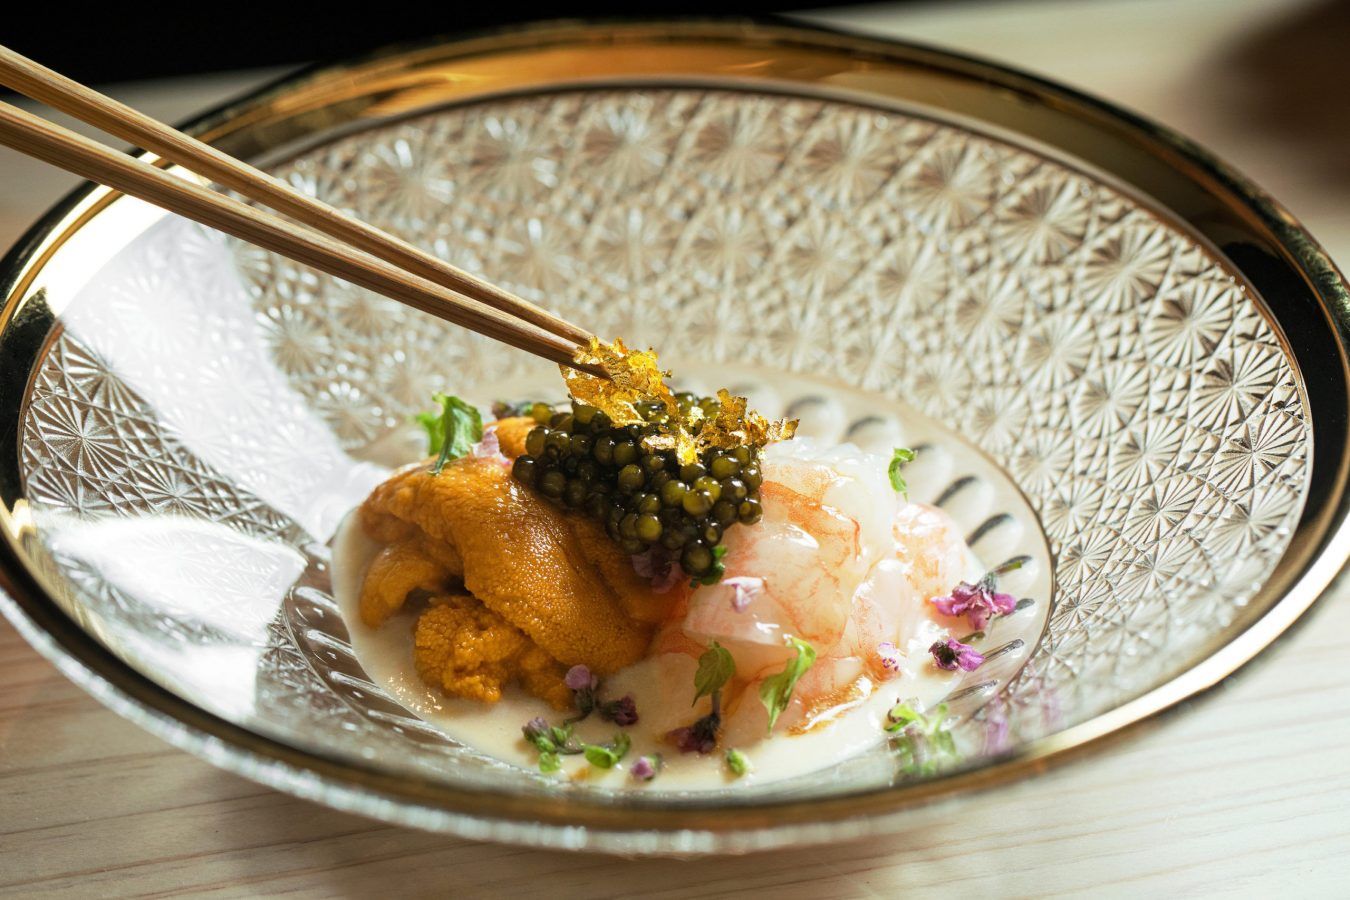 Two new Omakase options arrive with the new Jinhonten and revamped Sushi Ichizuke